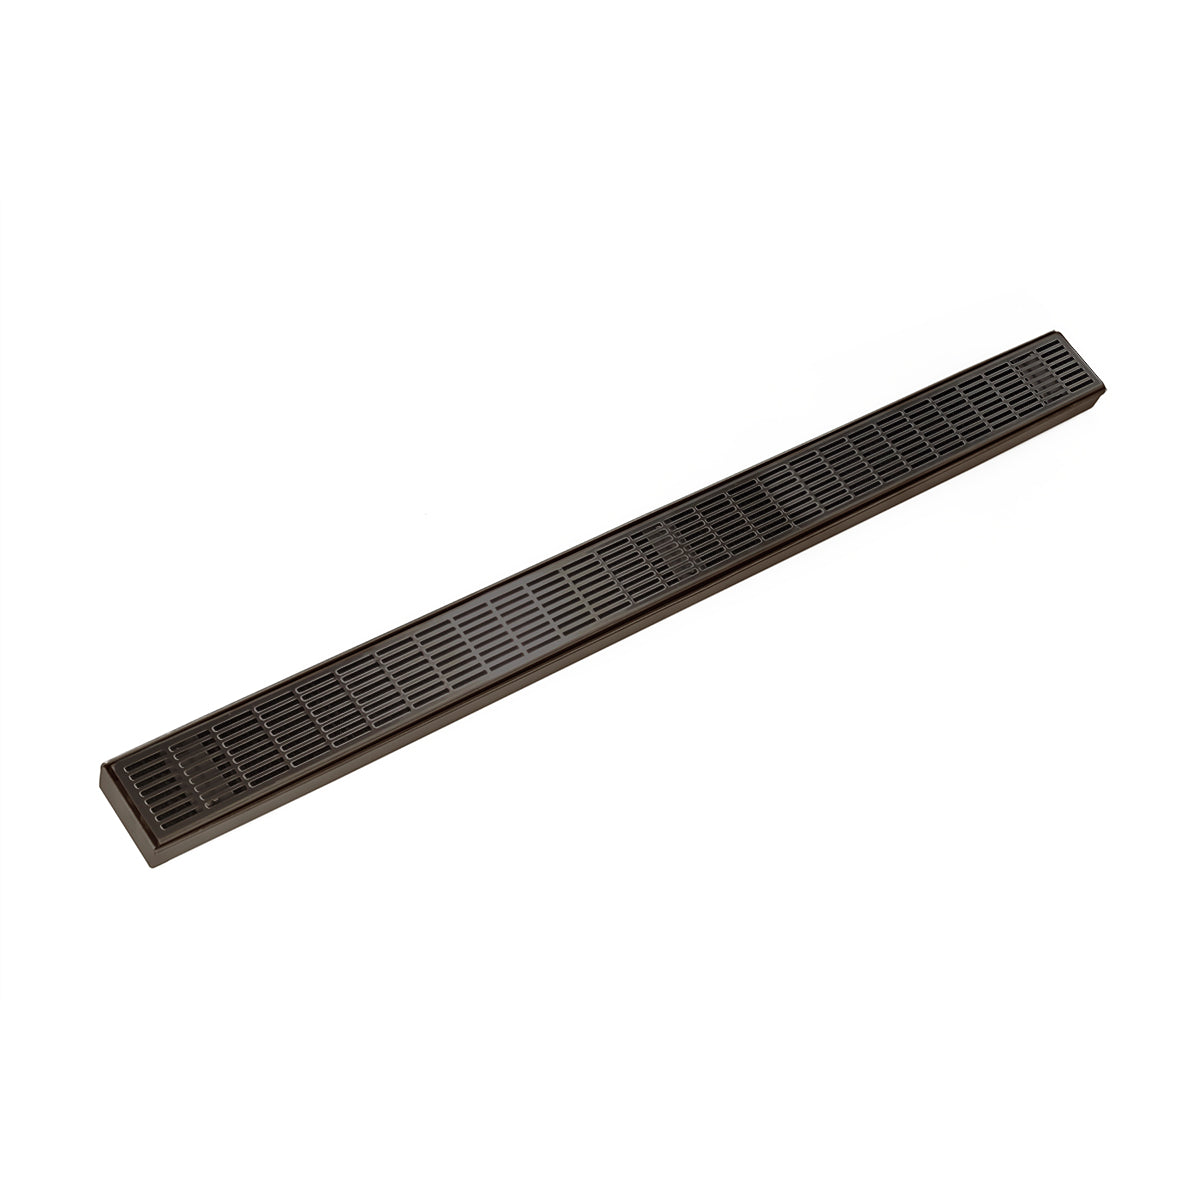 Infinity Drain 48" FX Series Fixed Length Linear Drain Kit with Perforated Slotted Grate